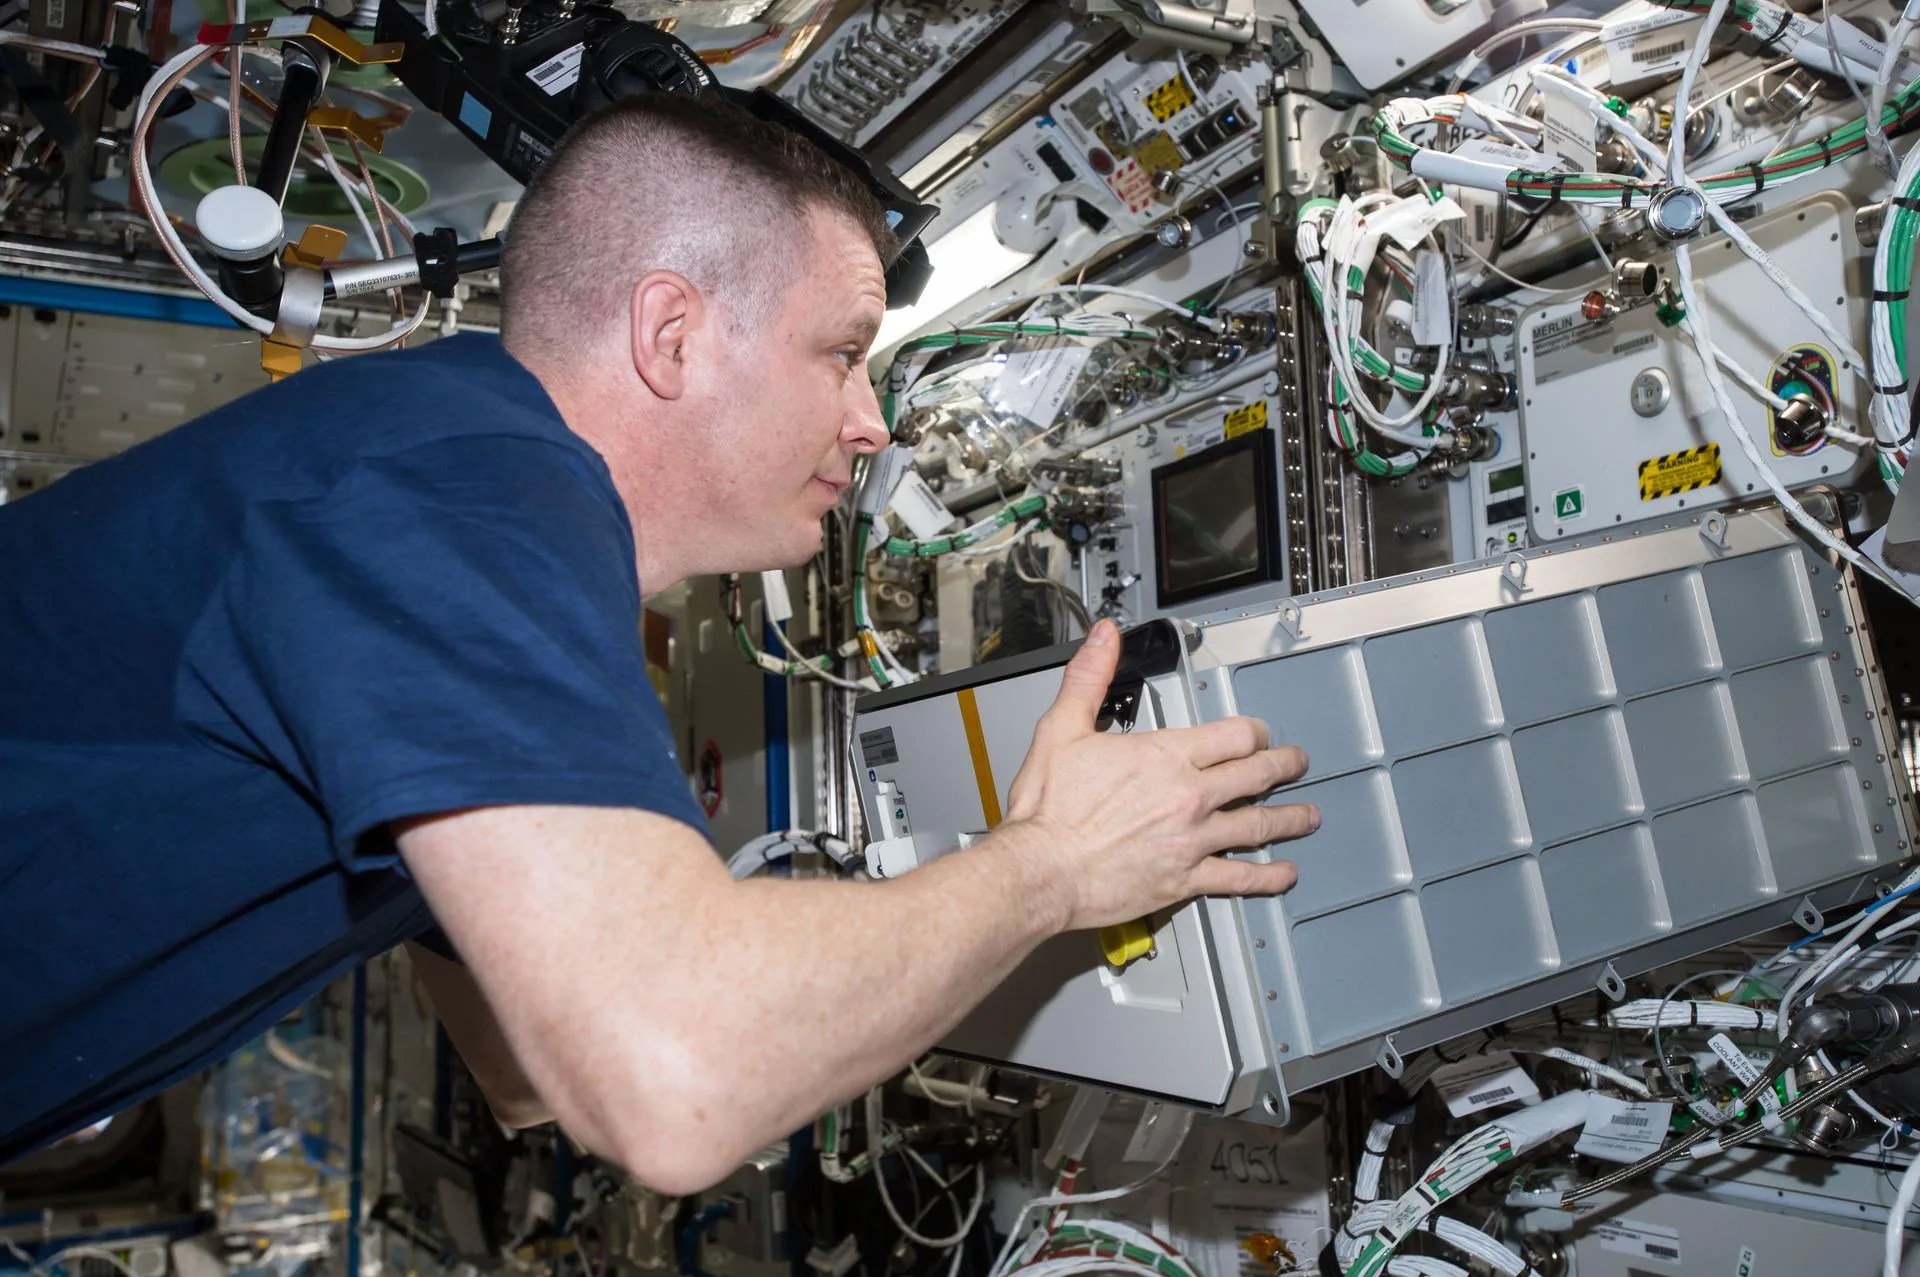 A photo of NASA astronaut Jack Fischer installing the Biological Research In Canisters (BRIC) Light Emitting Diode (LED) box for future BRIC-LED experiments.